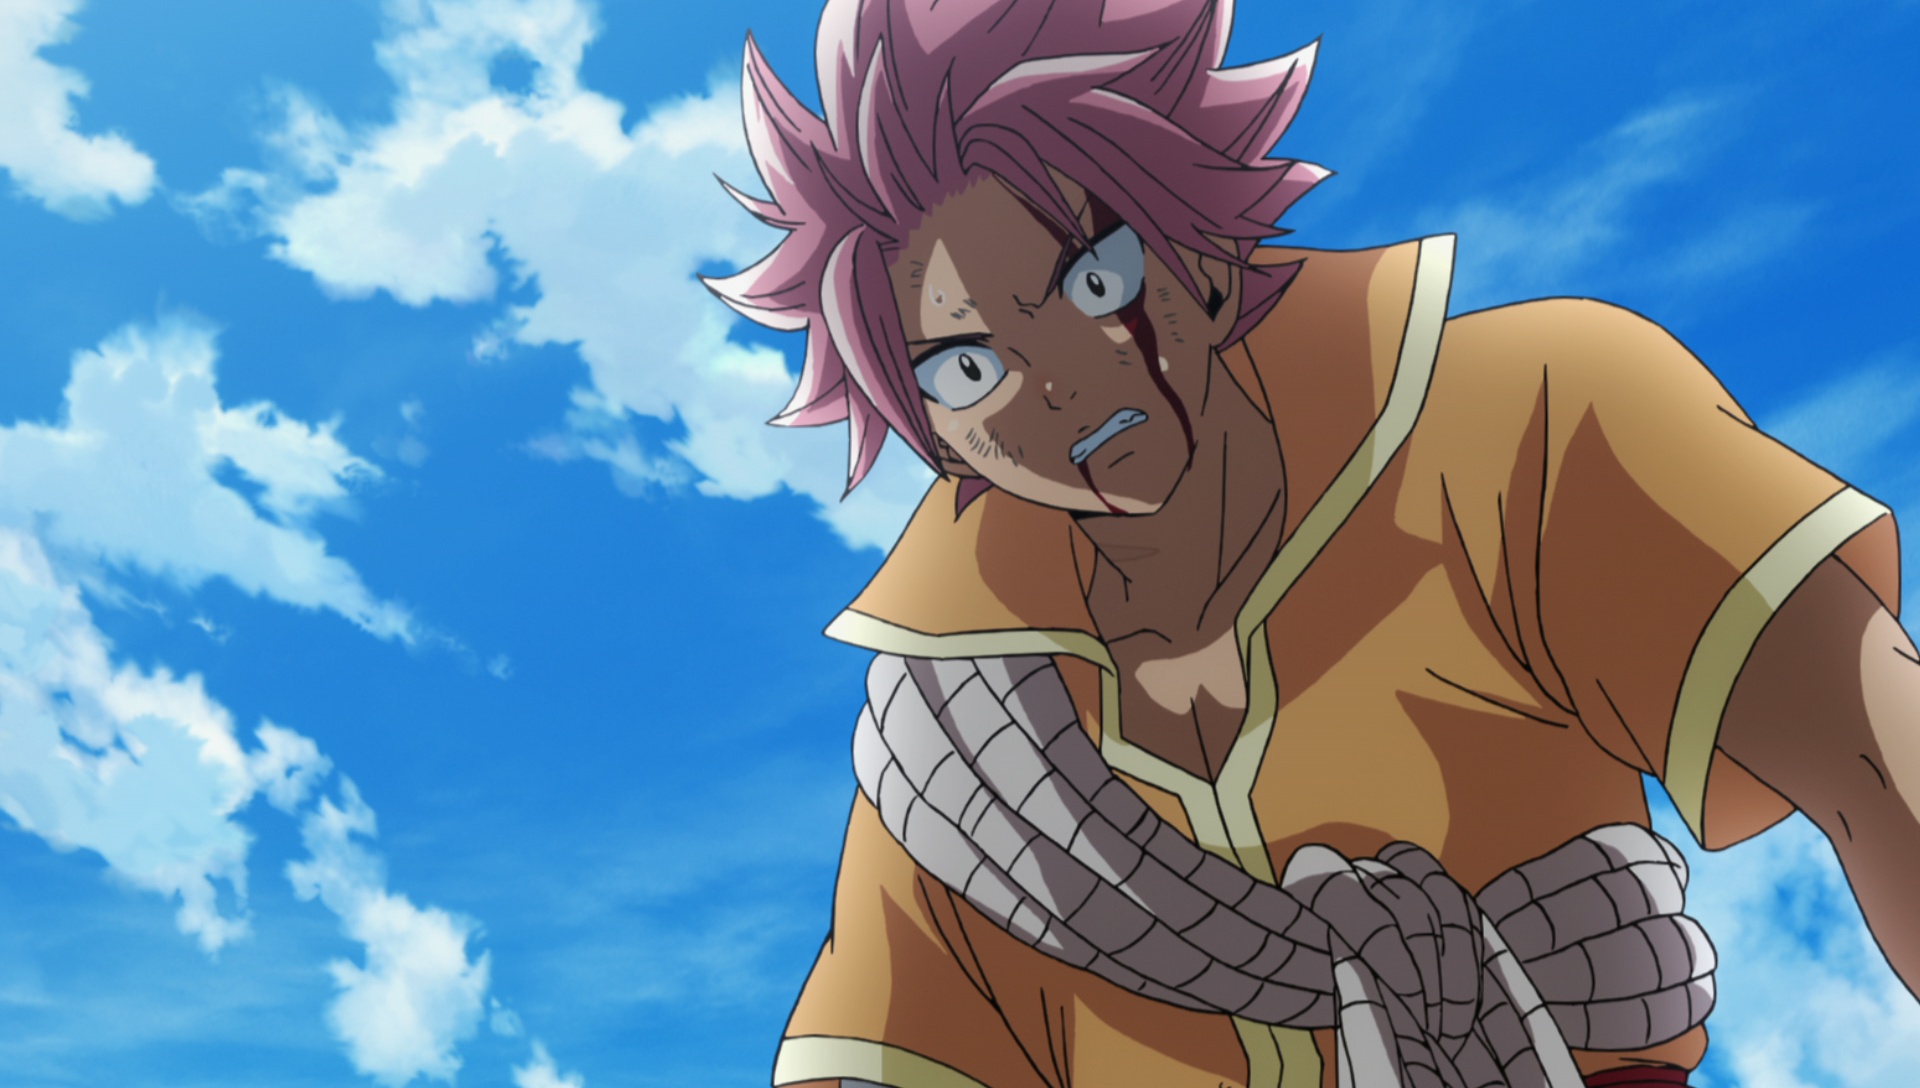 Fairy Tail: Dragon Cry streaming: where to watch online?